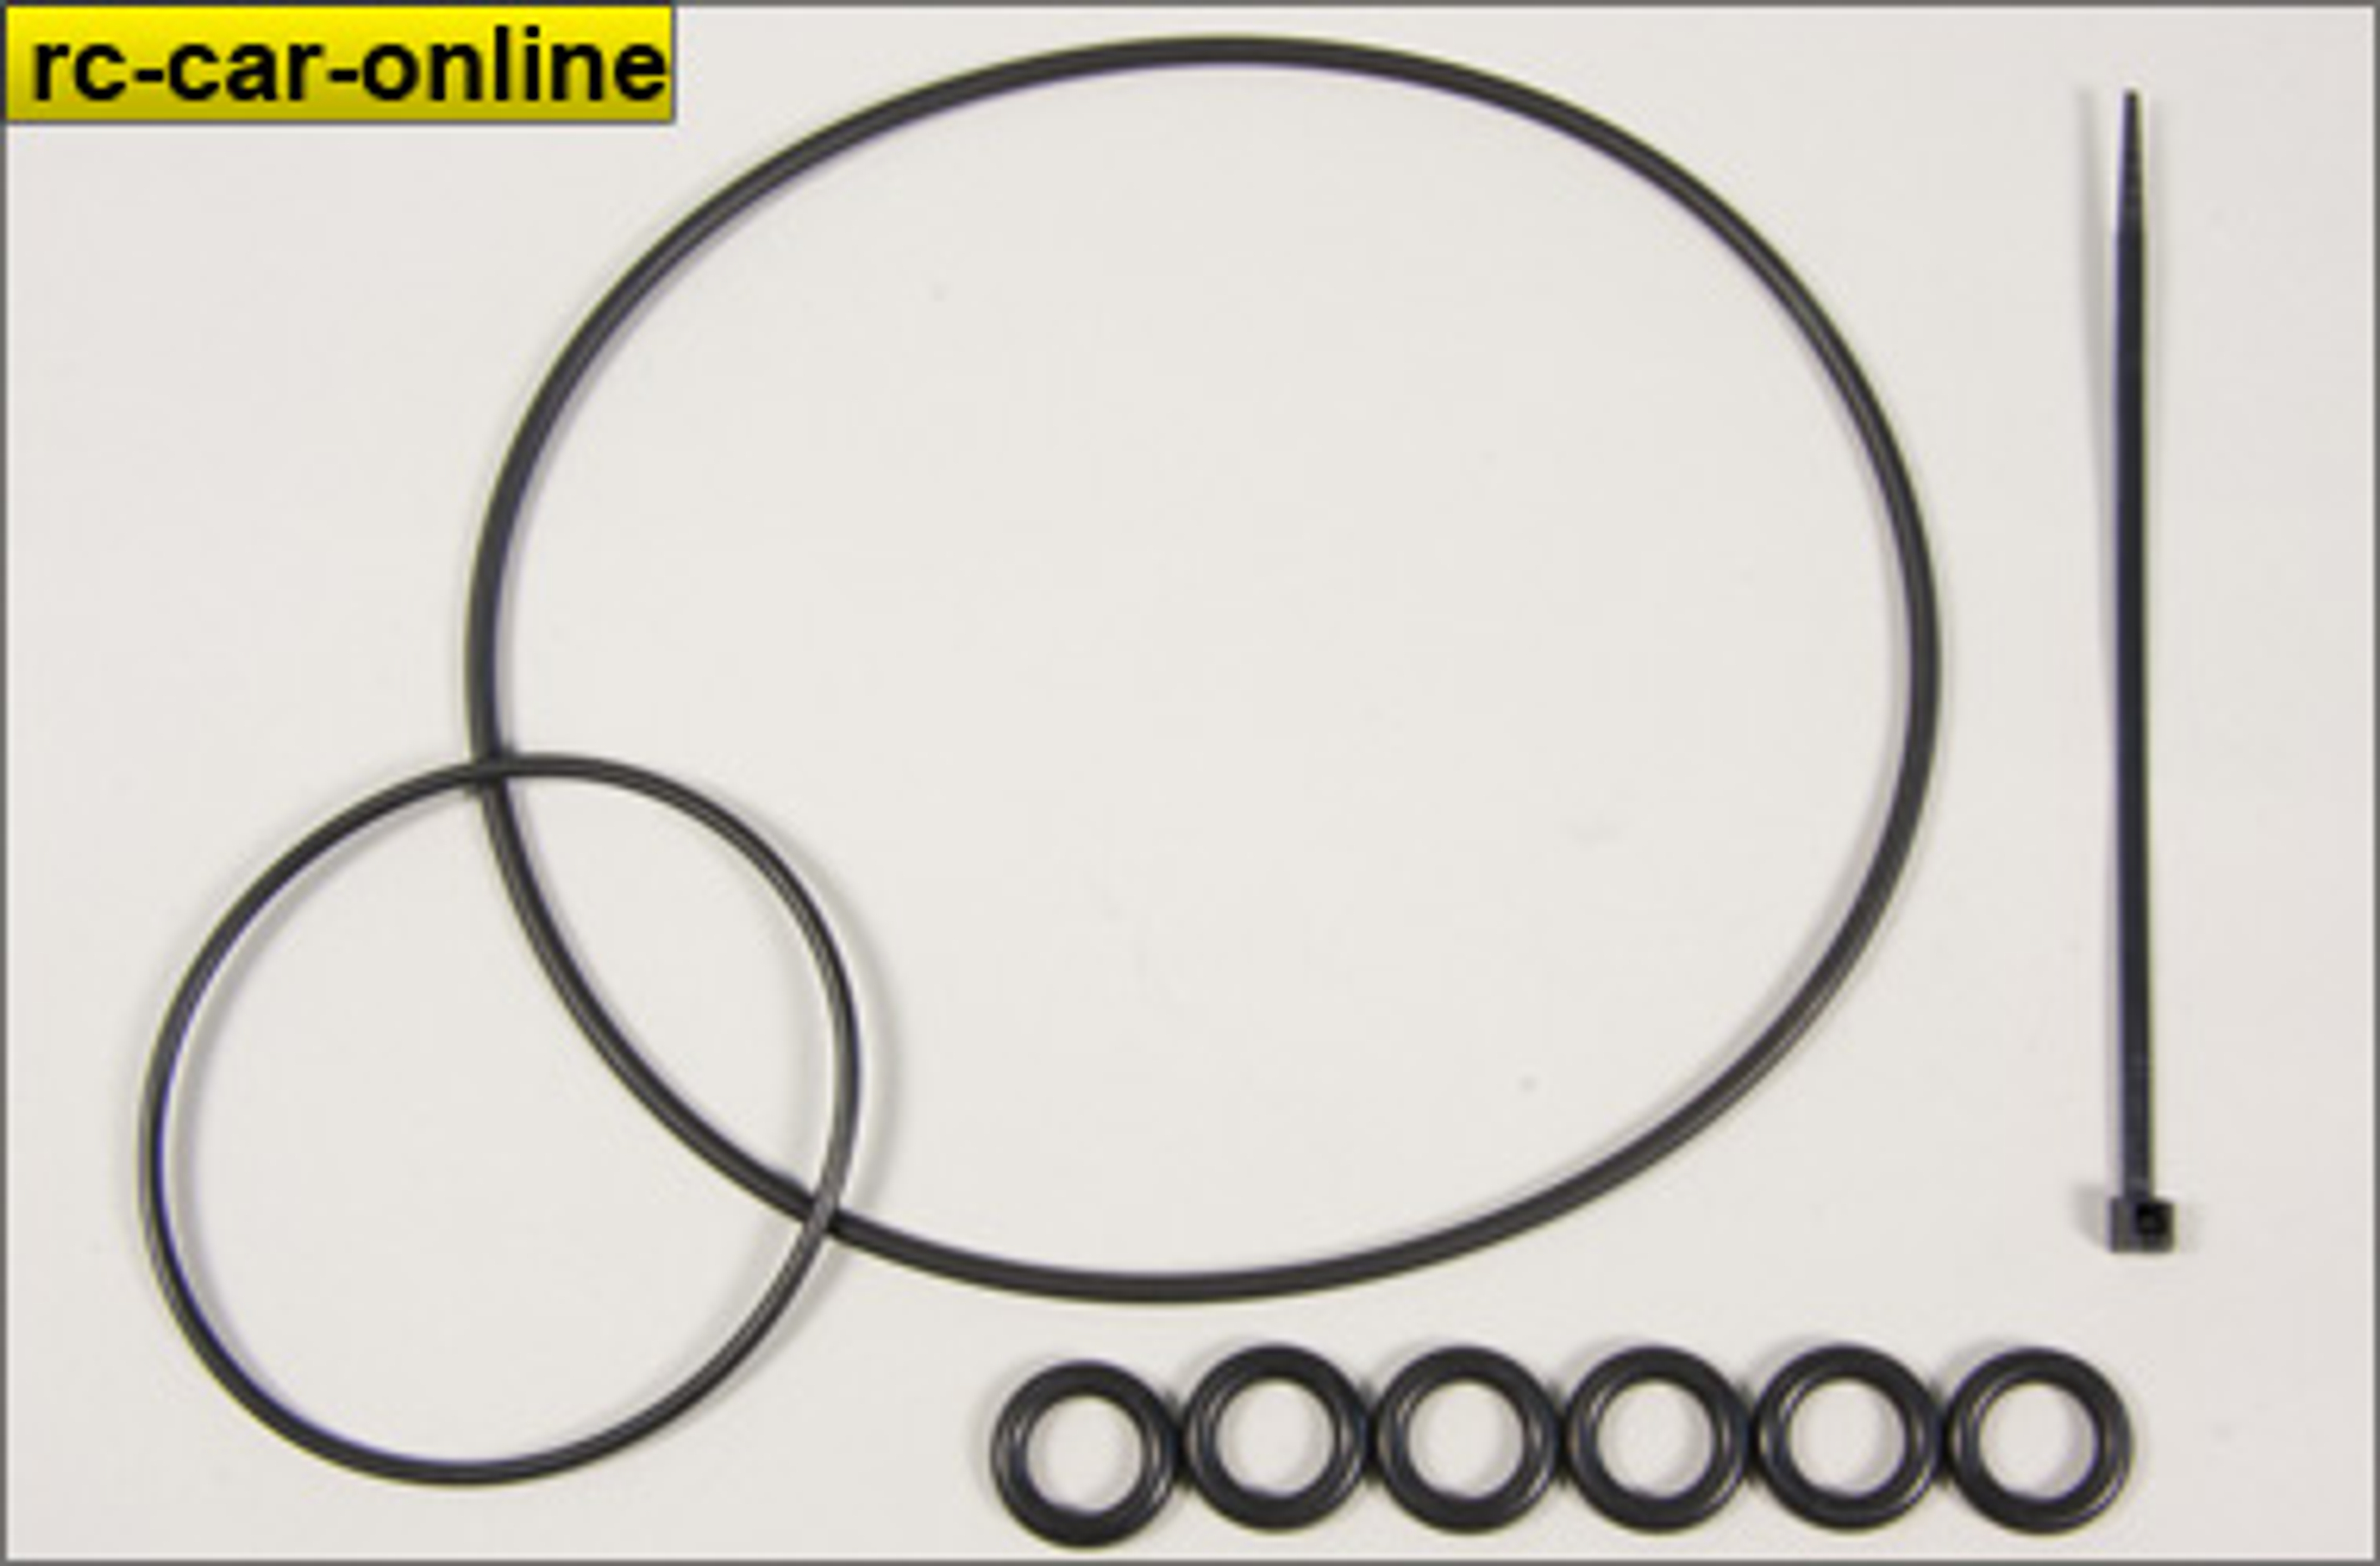 Mielke 5226 o-ring set for air filter no. 5201 and 5201/01, set